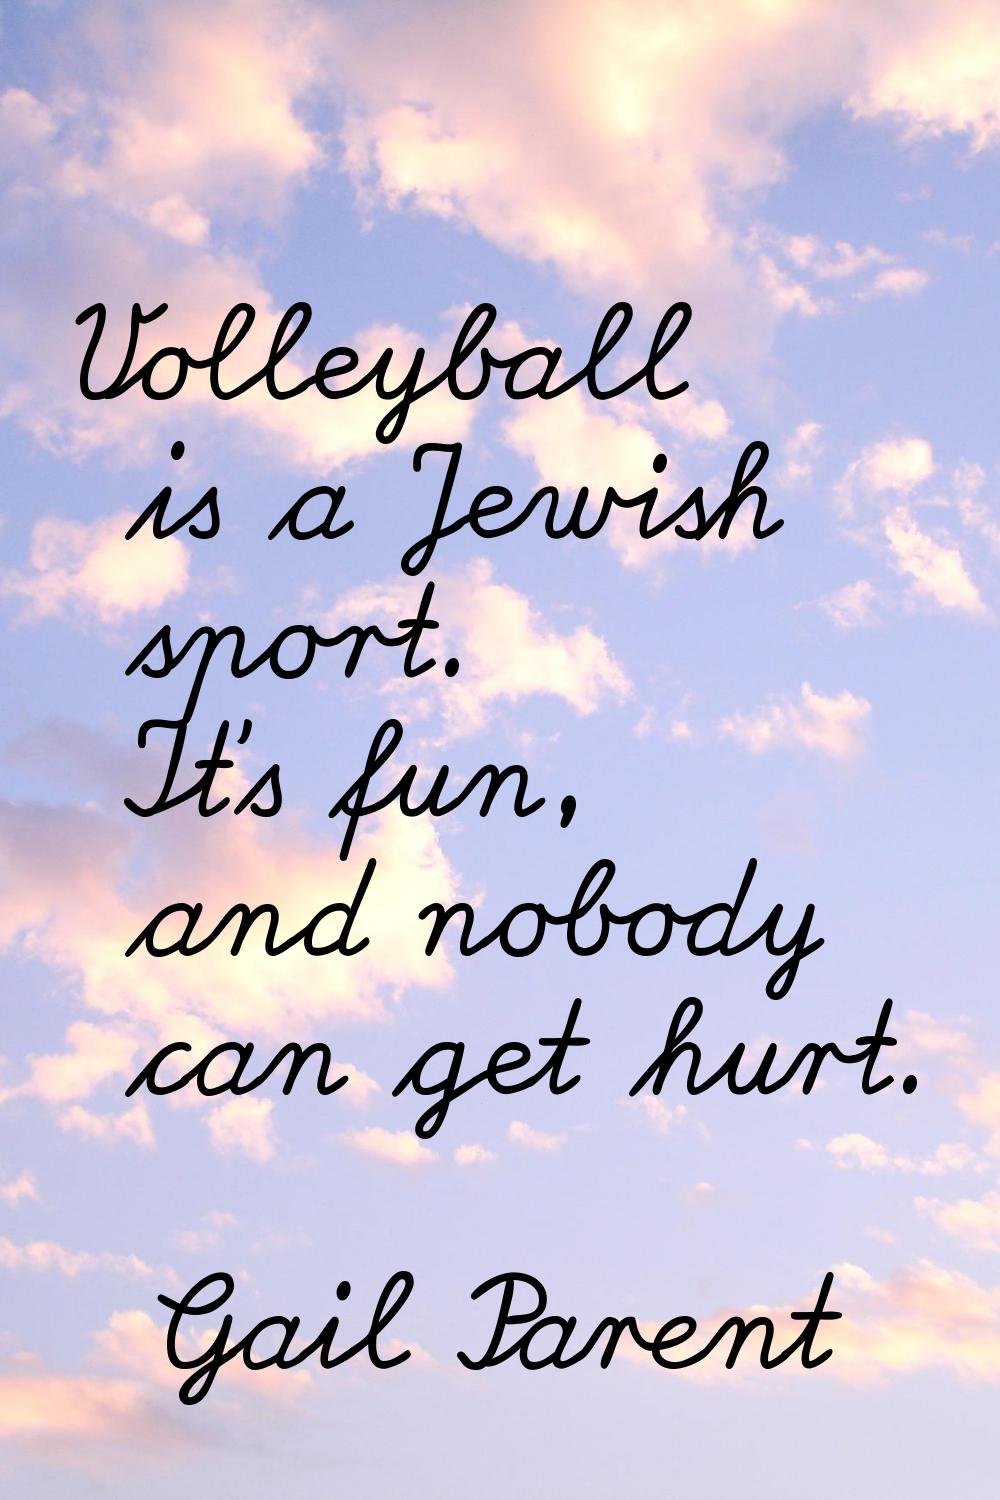 Volleyball is a Jewish sport. It's fun, and nobody can get hurt.